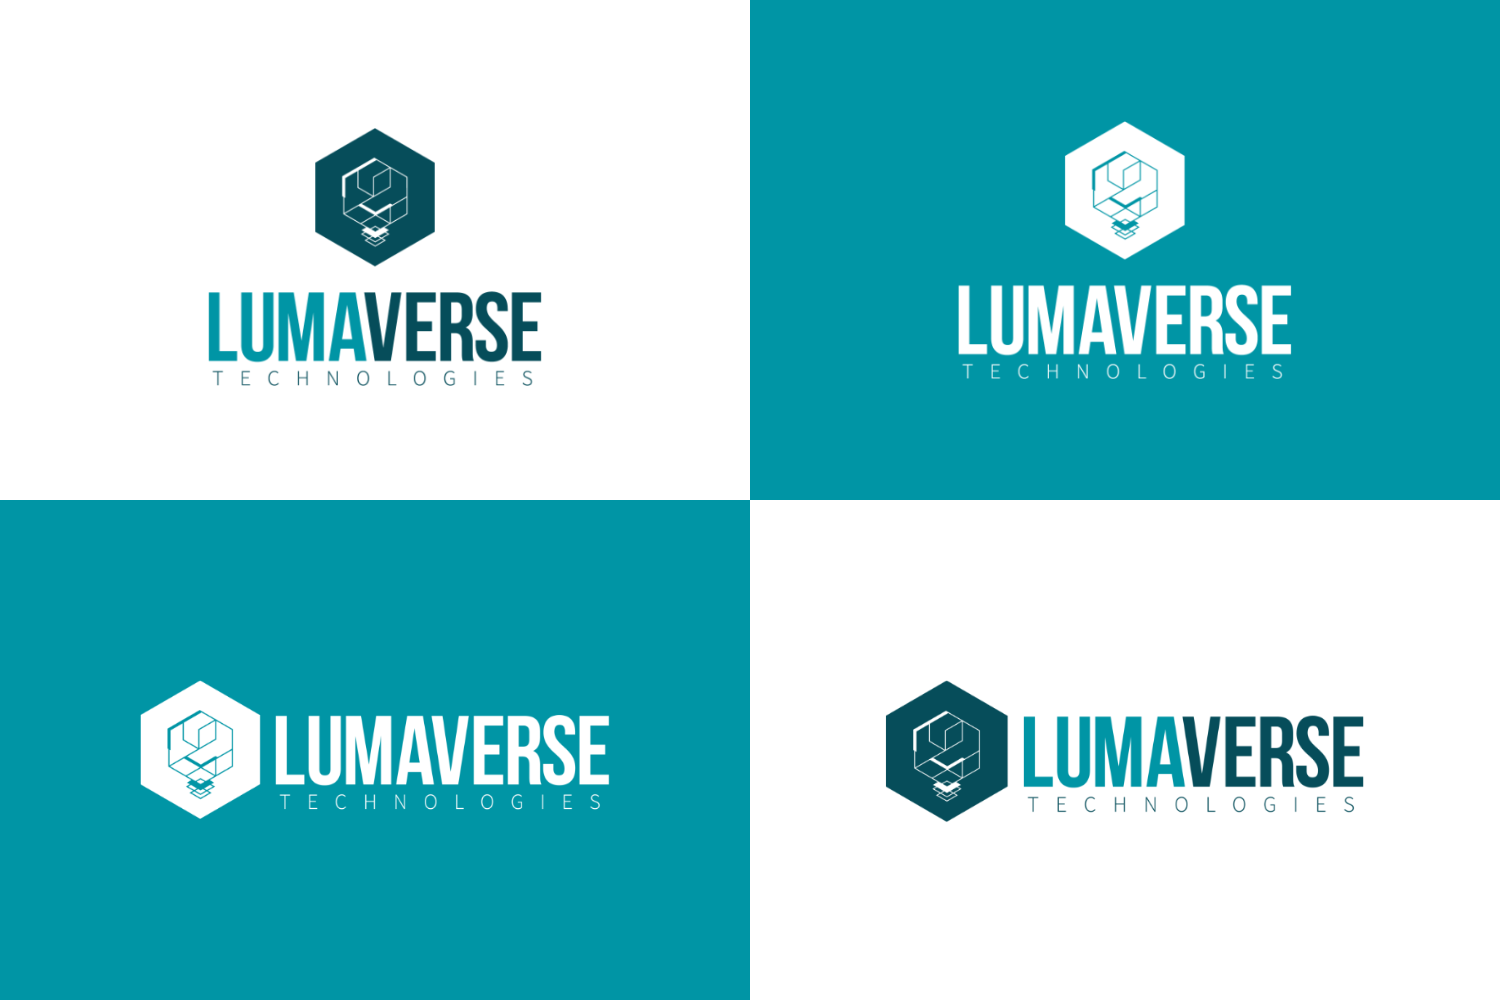 Four different logo designs for a company named "Lumaverse Technologies," each featuring a hexagonal emblem and the company name, displayed against a teal background with variations in the emblem's design and the font